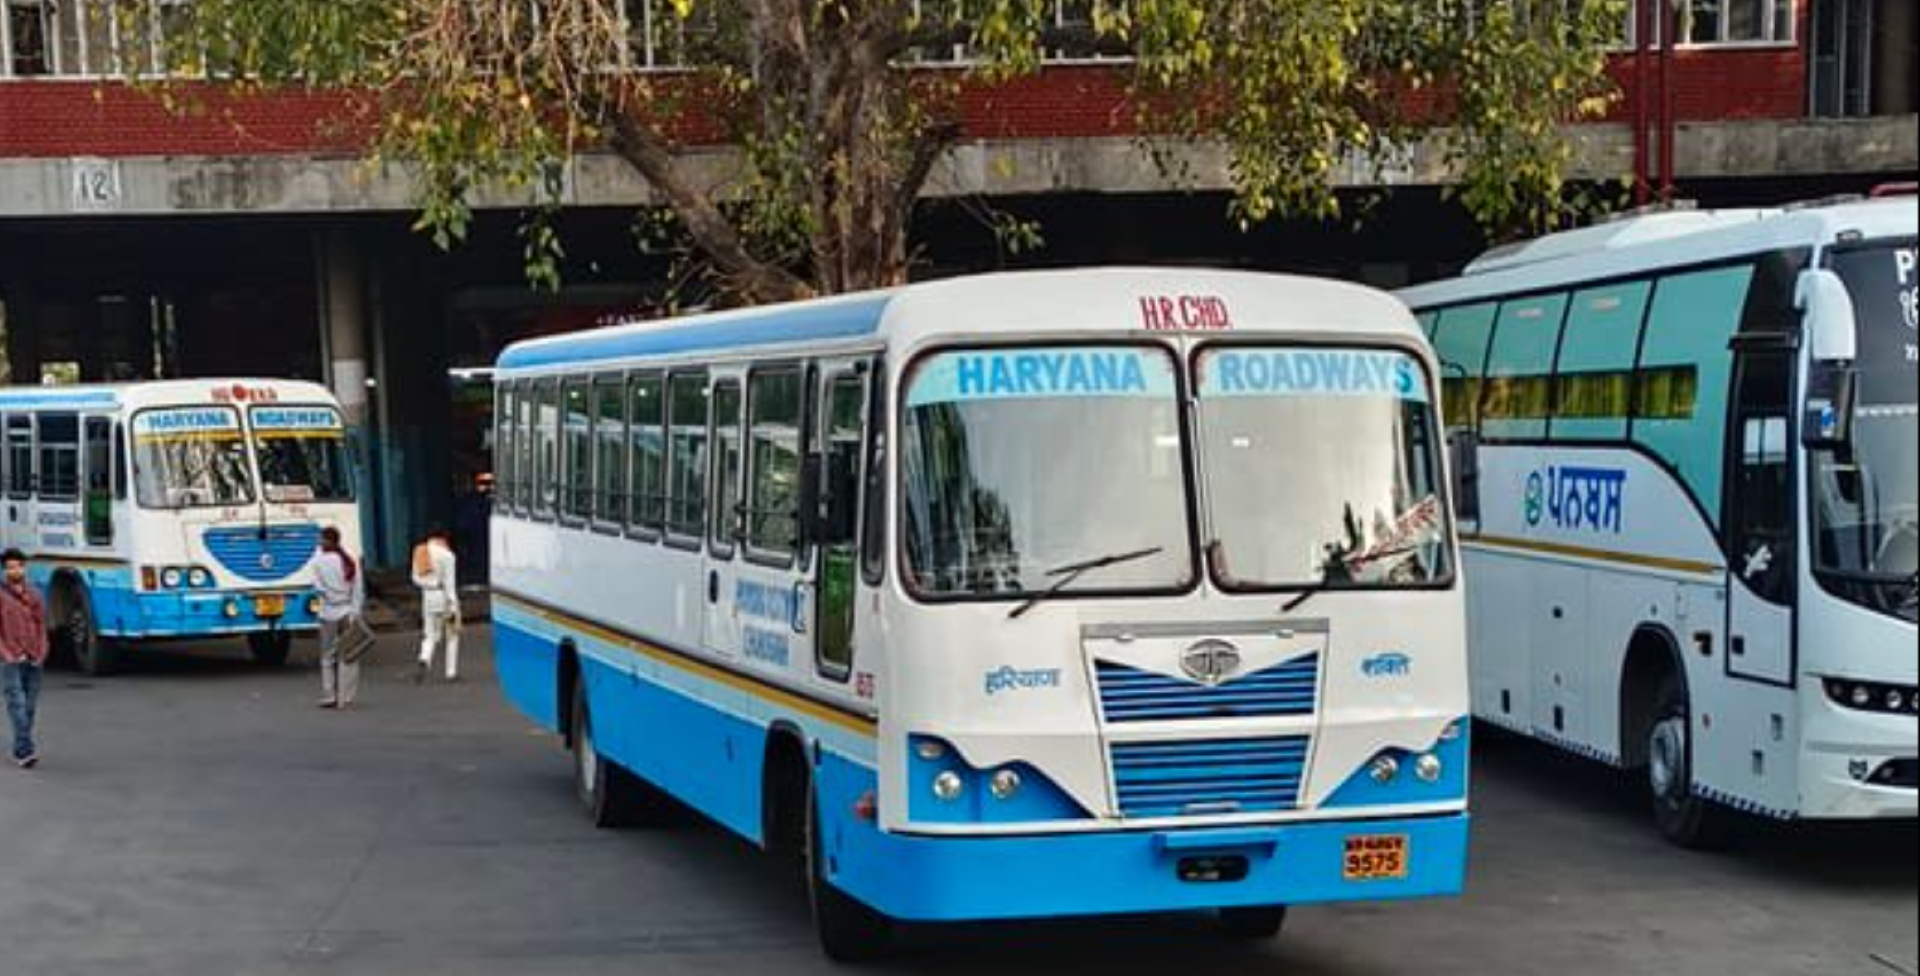 Haryana Roadways Eliminates Age Limits: Children and Seniors Now Pay Full Fare